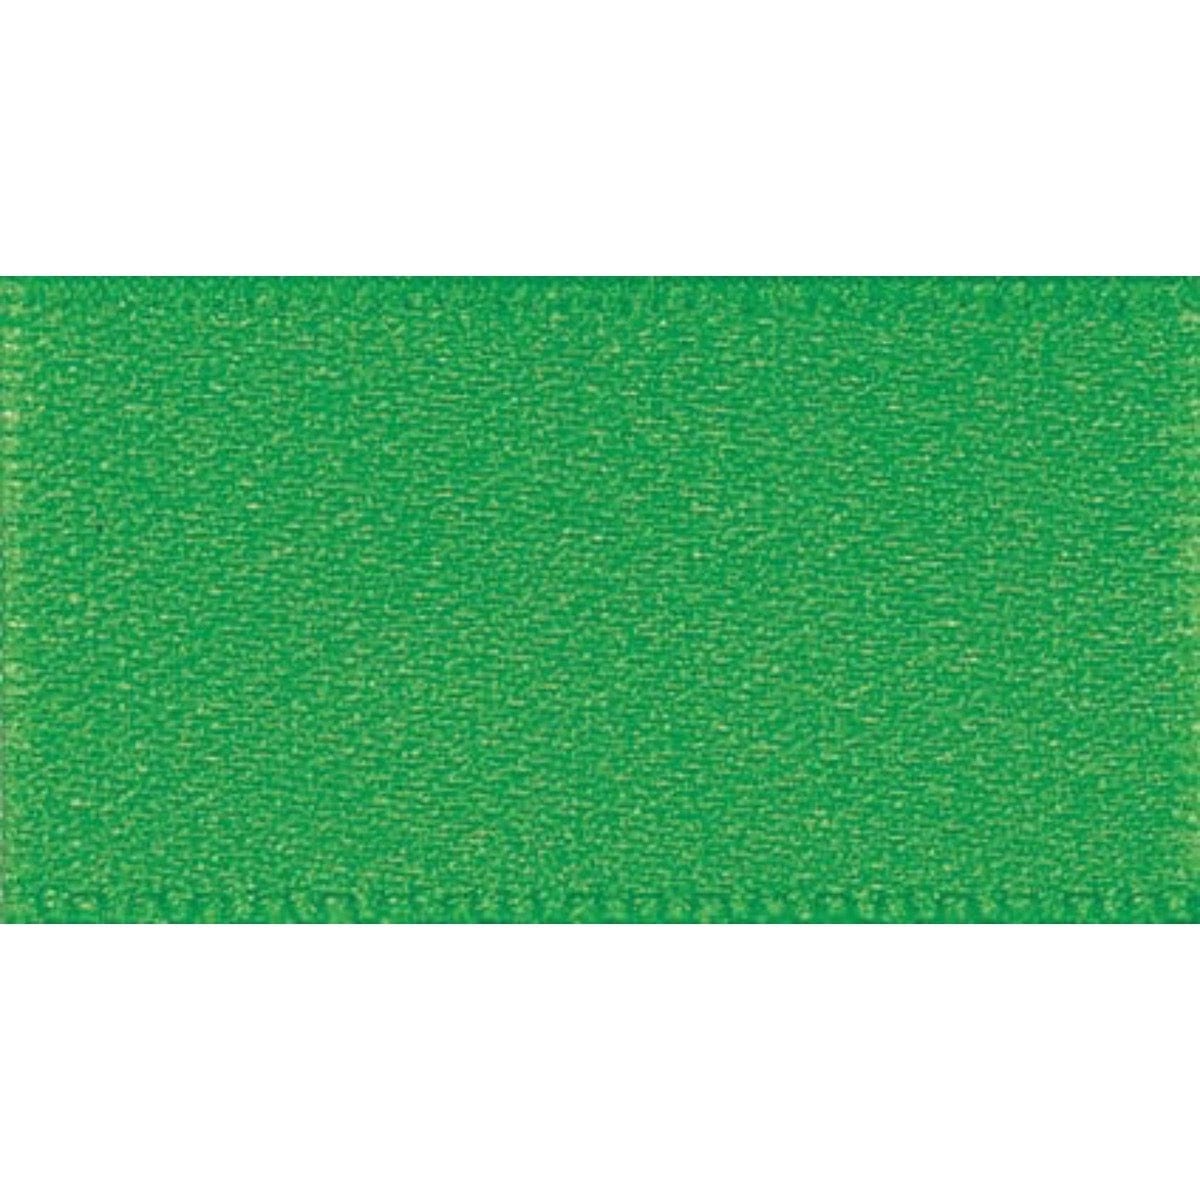 Double Faced Satin Ribbon Emerald Green: 35mm wide. Price per metre.